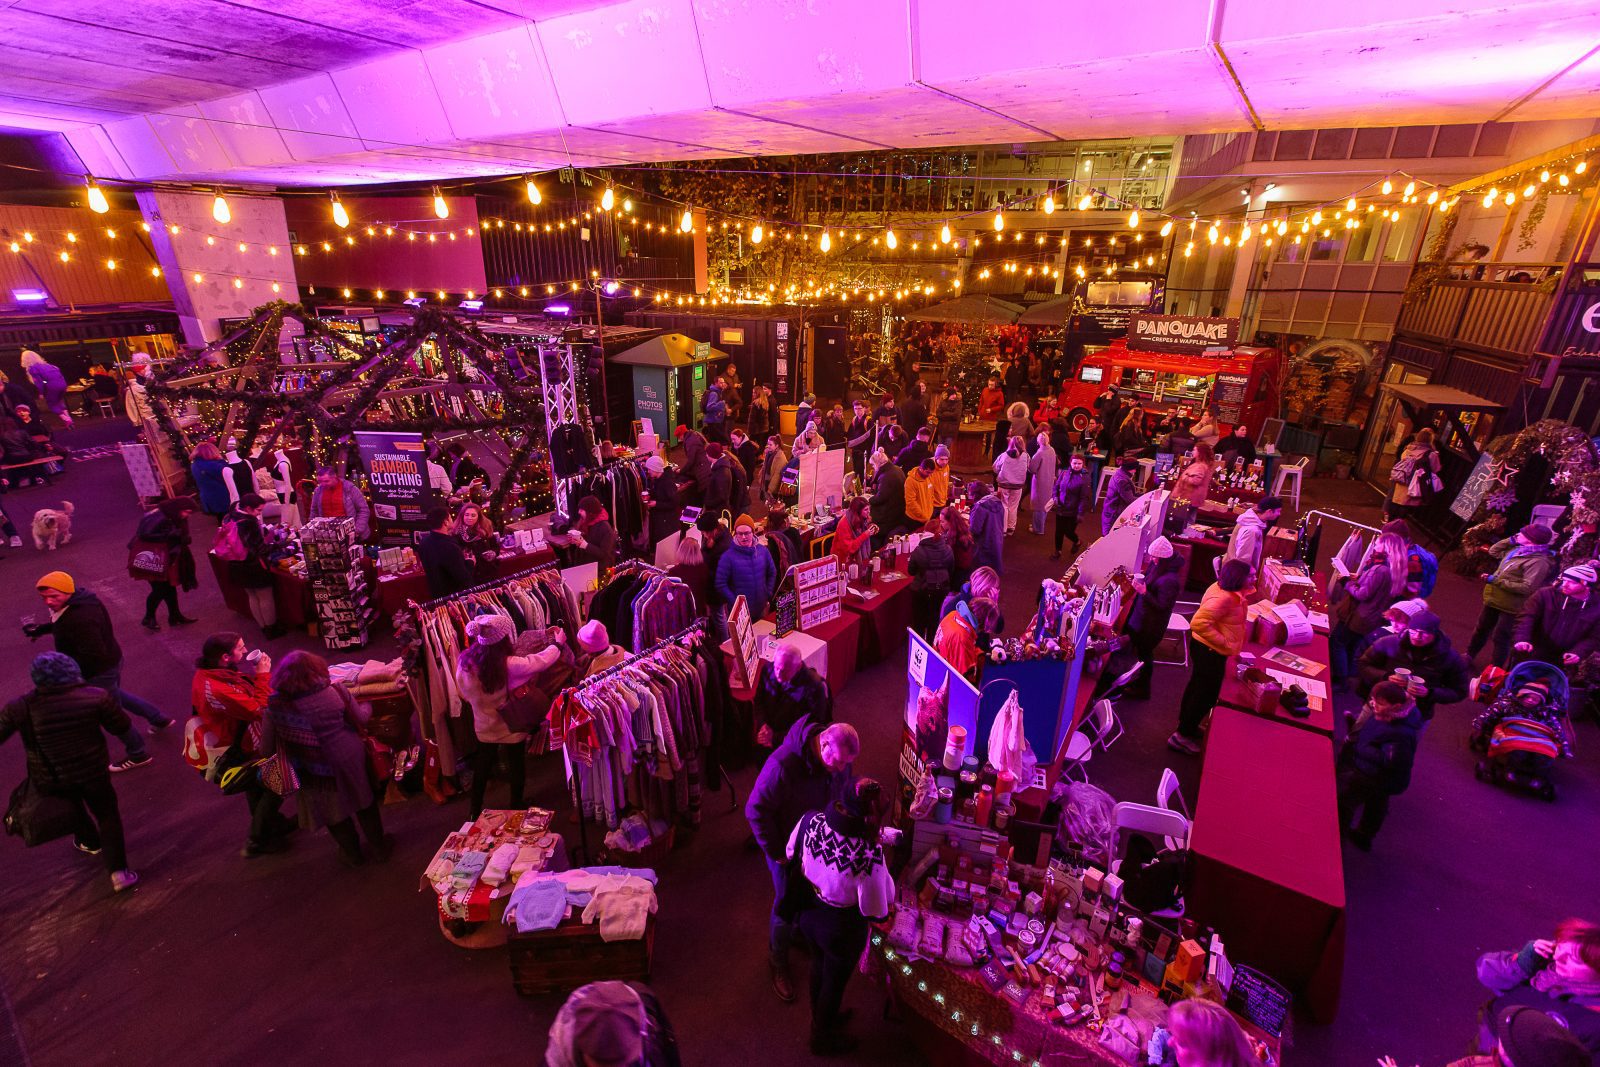 A zero-waste sustainable market is coming to Hatch next month, The Manc